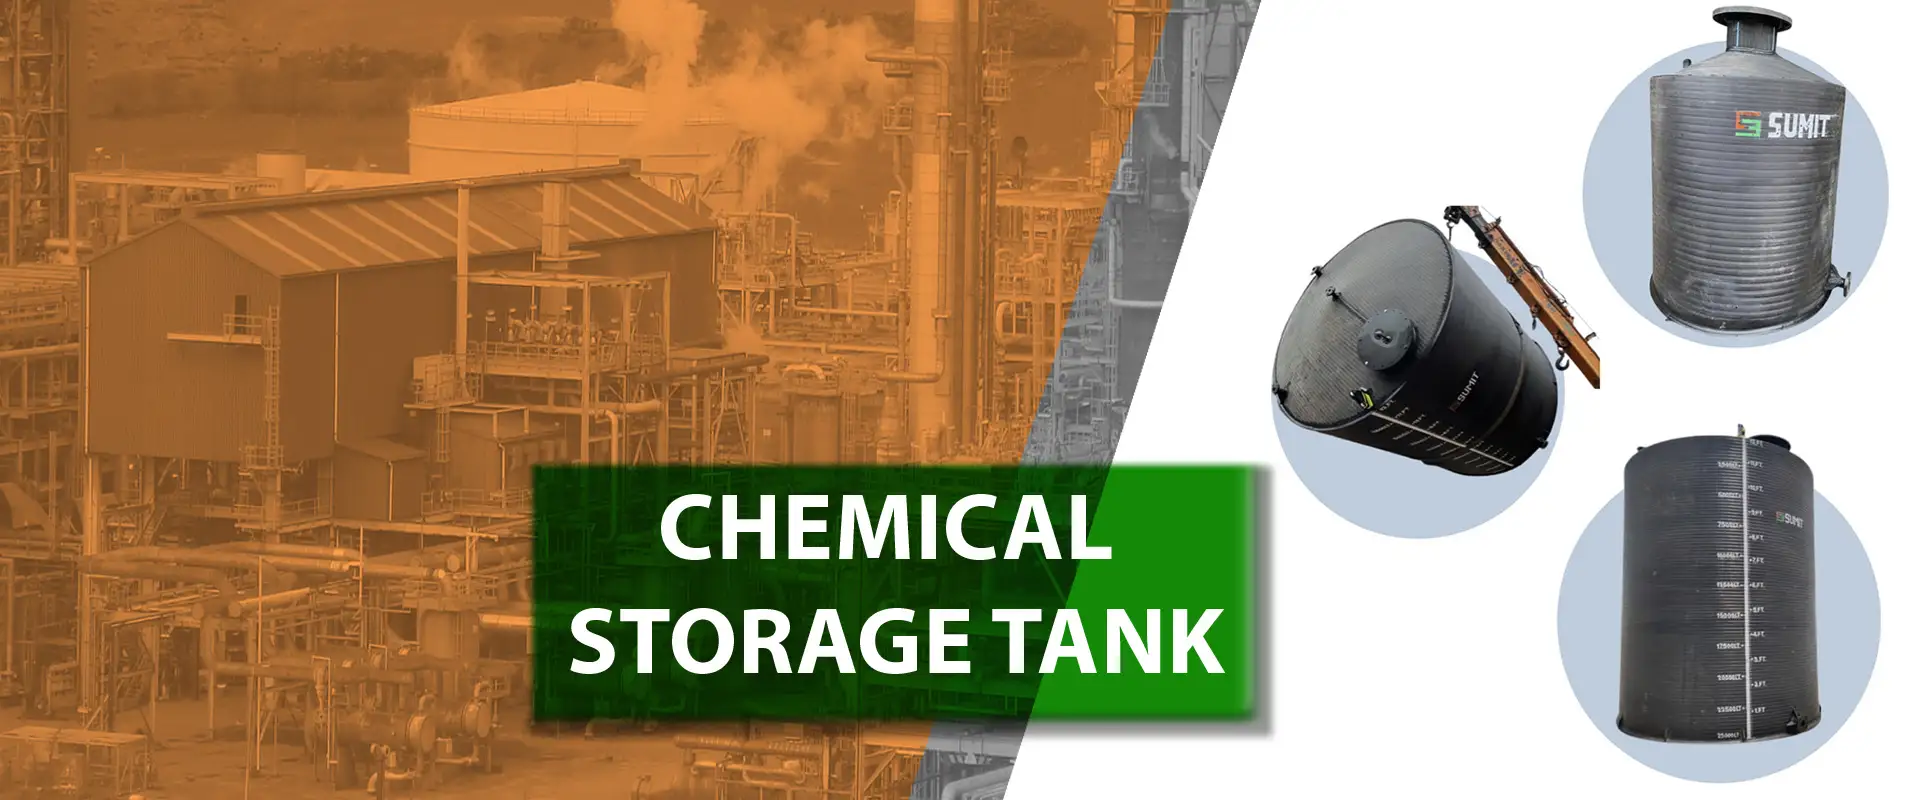 chemical storage equipments in Iran